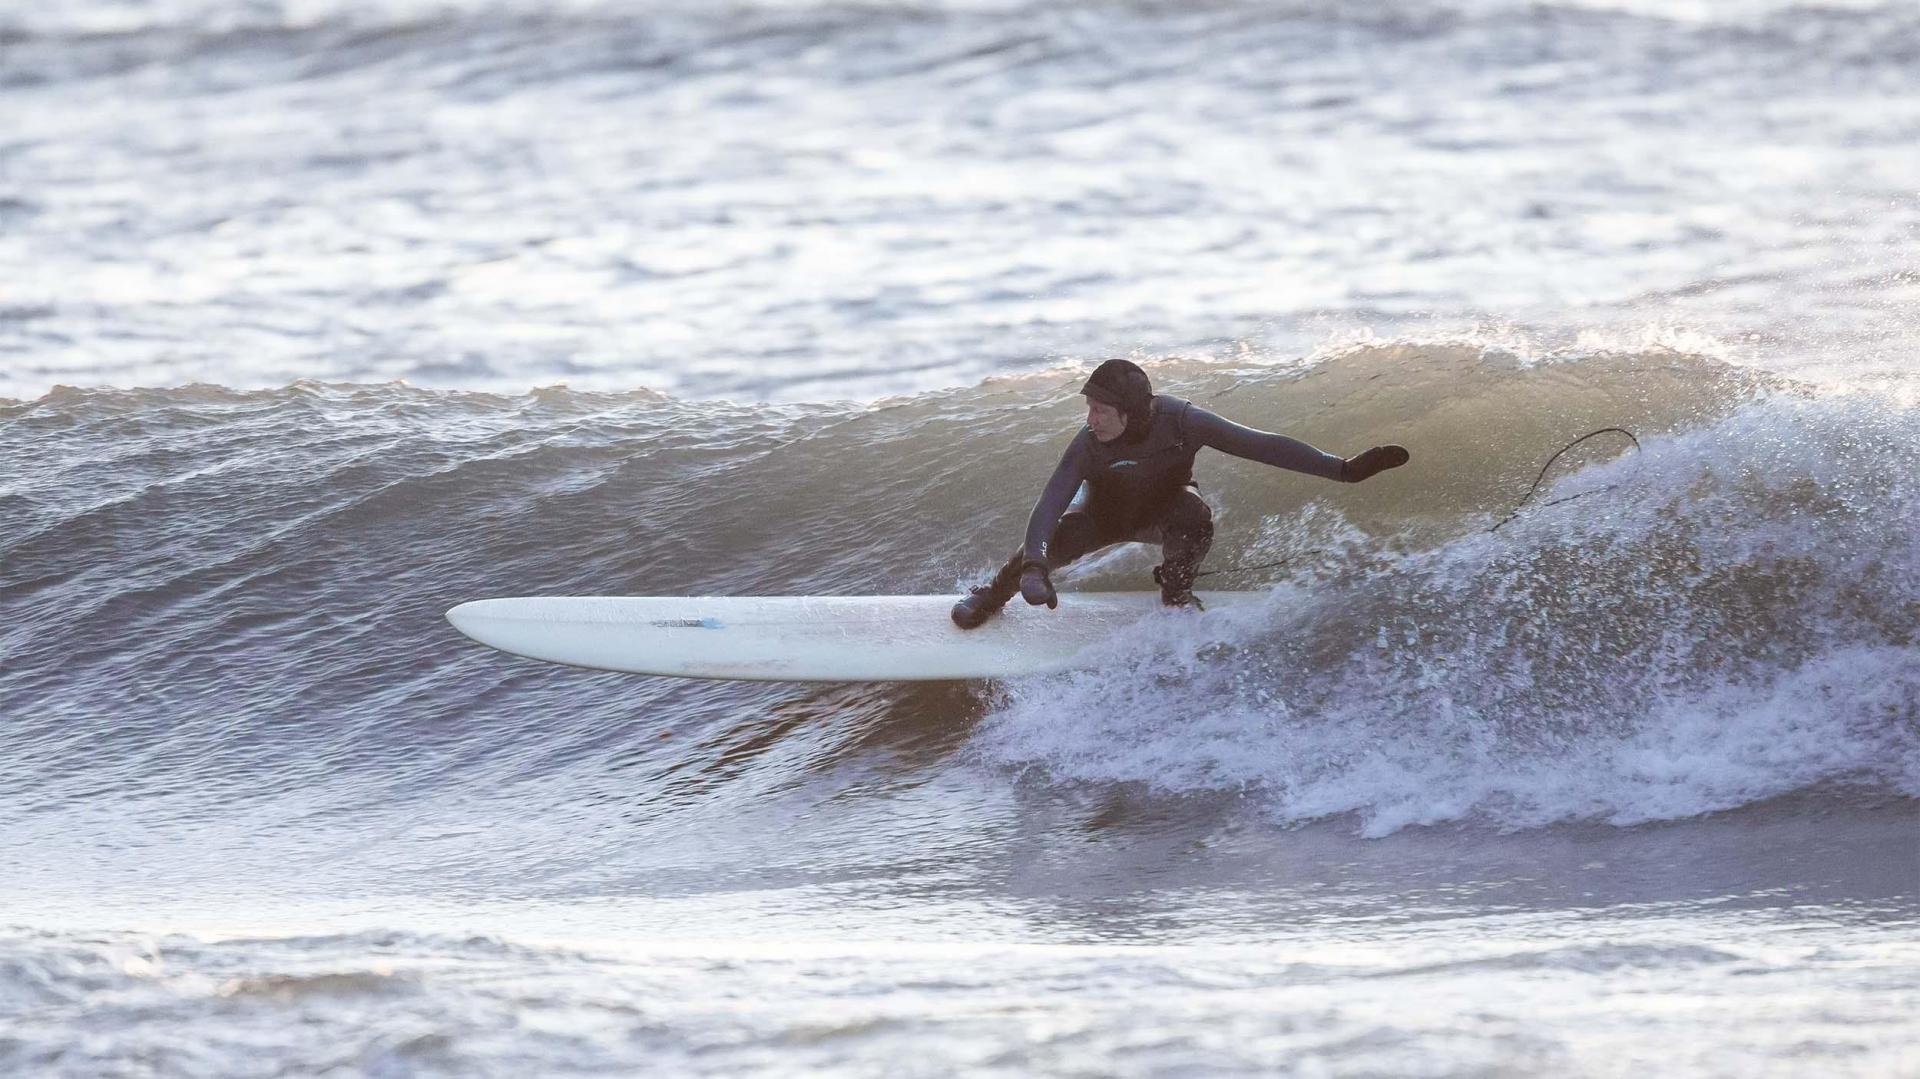 Here's How to Surf the Great Lakes, America's Third Coast